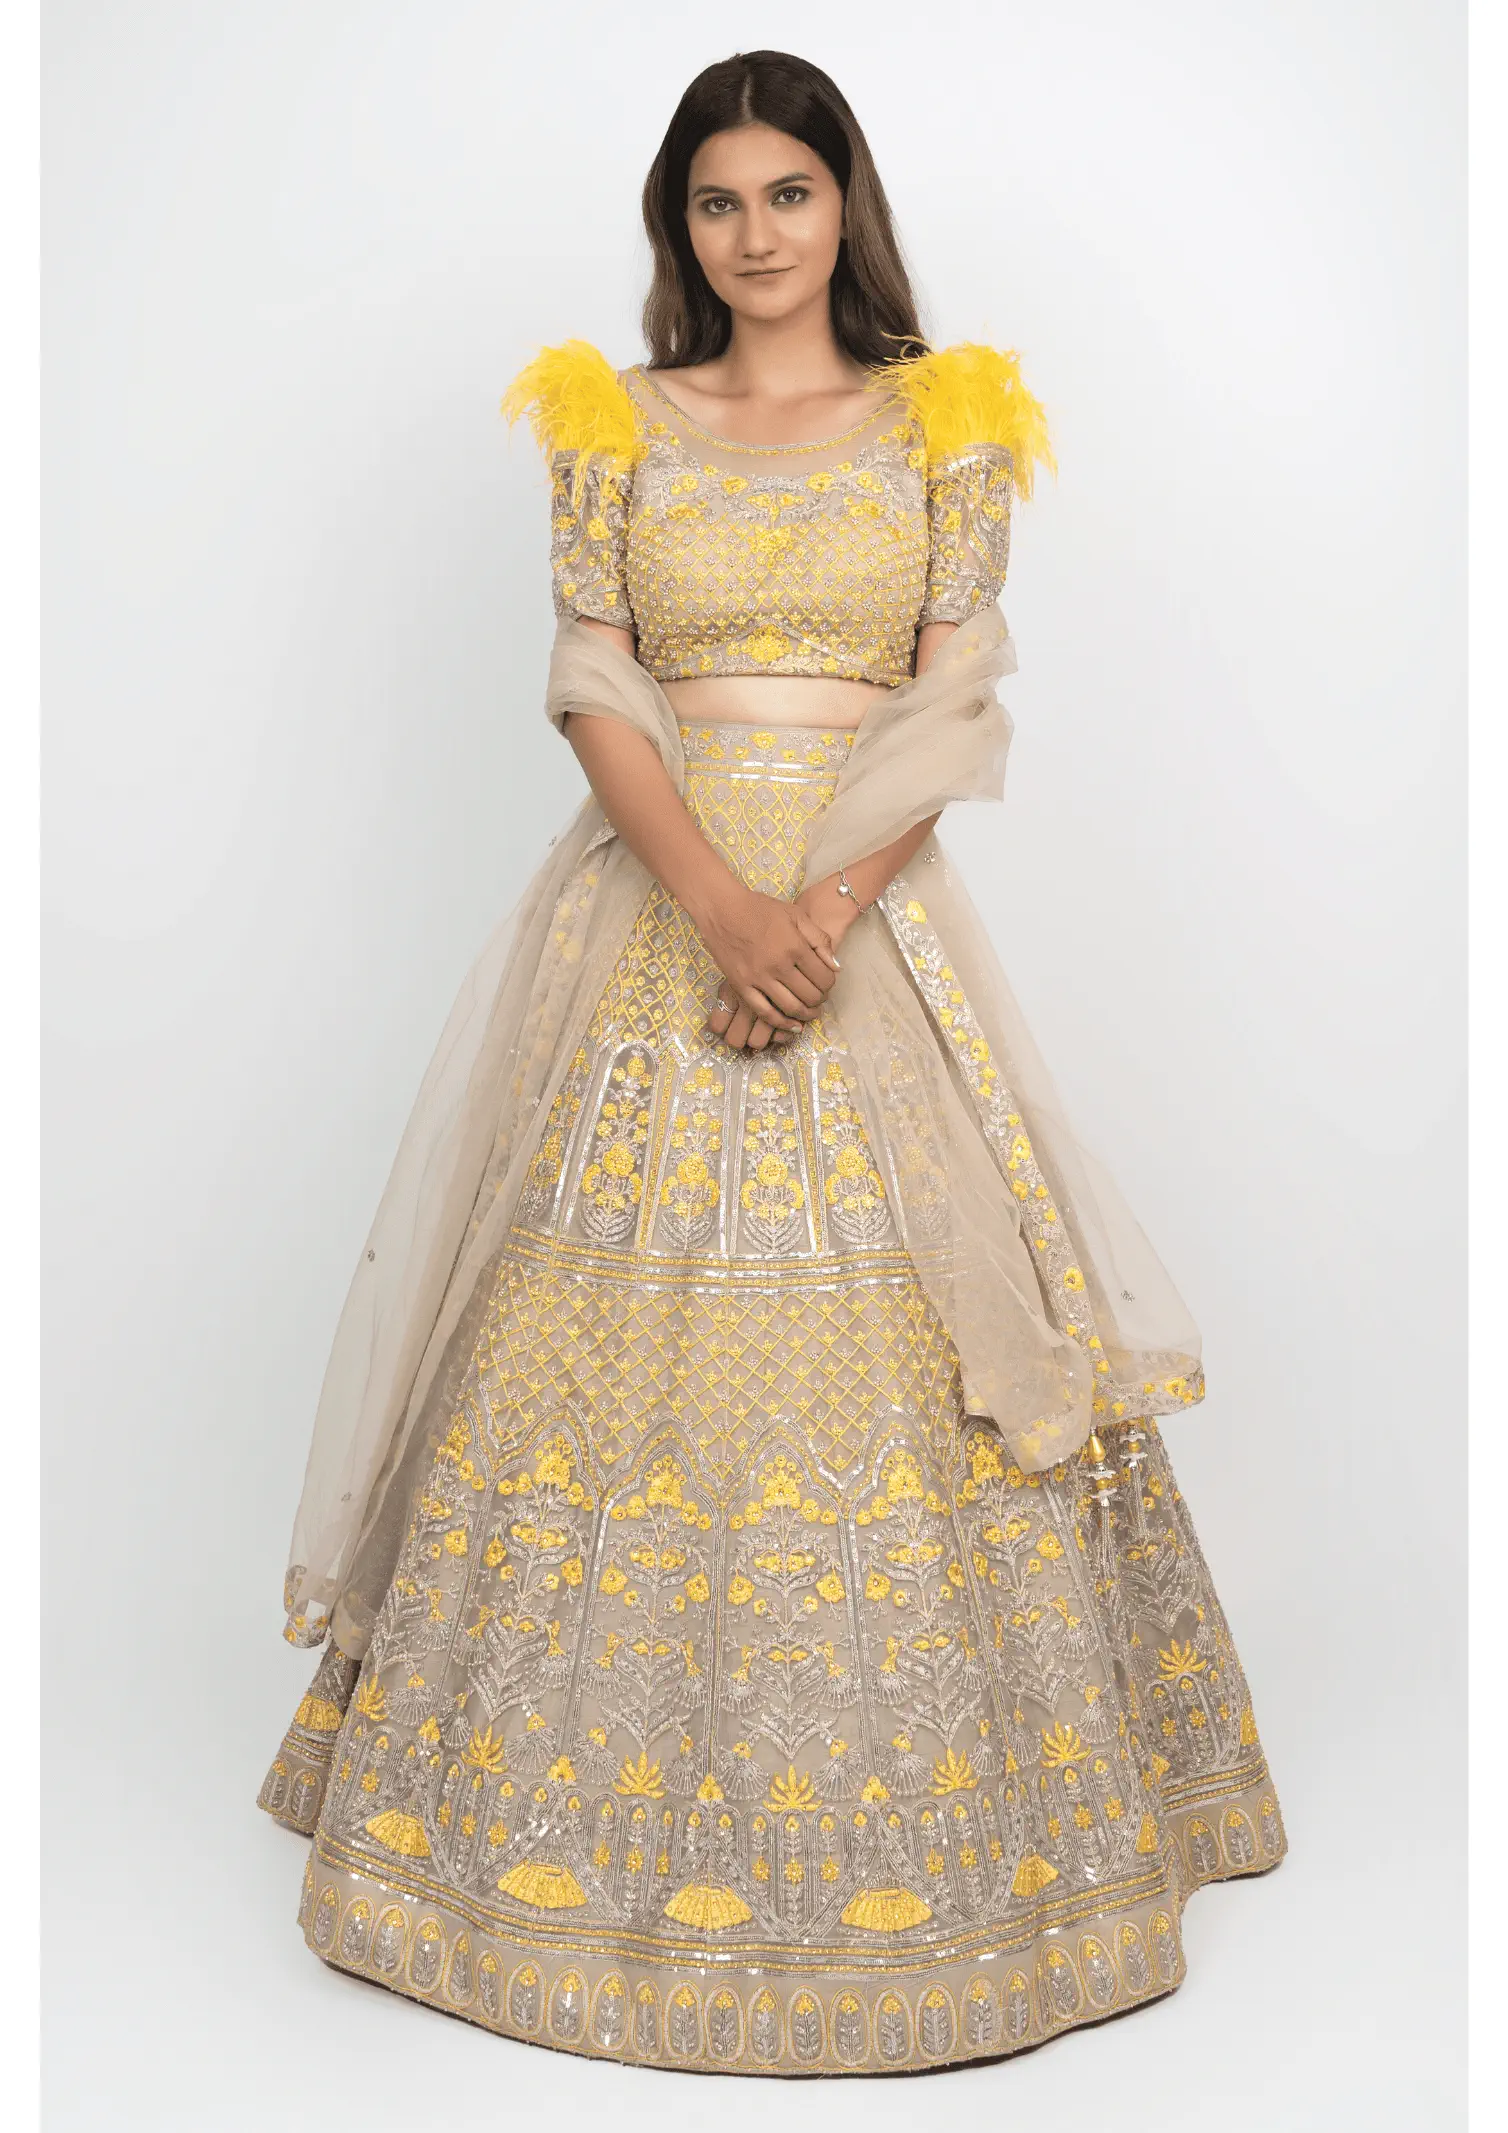 Beige and Yellow Haldi Ceremony Outfit